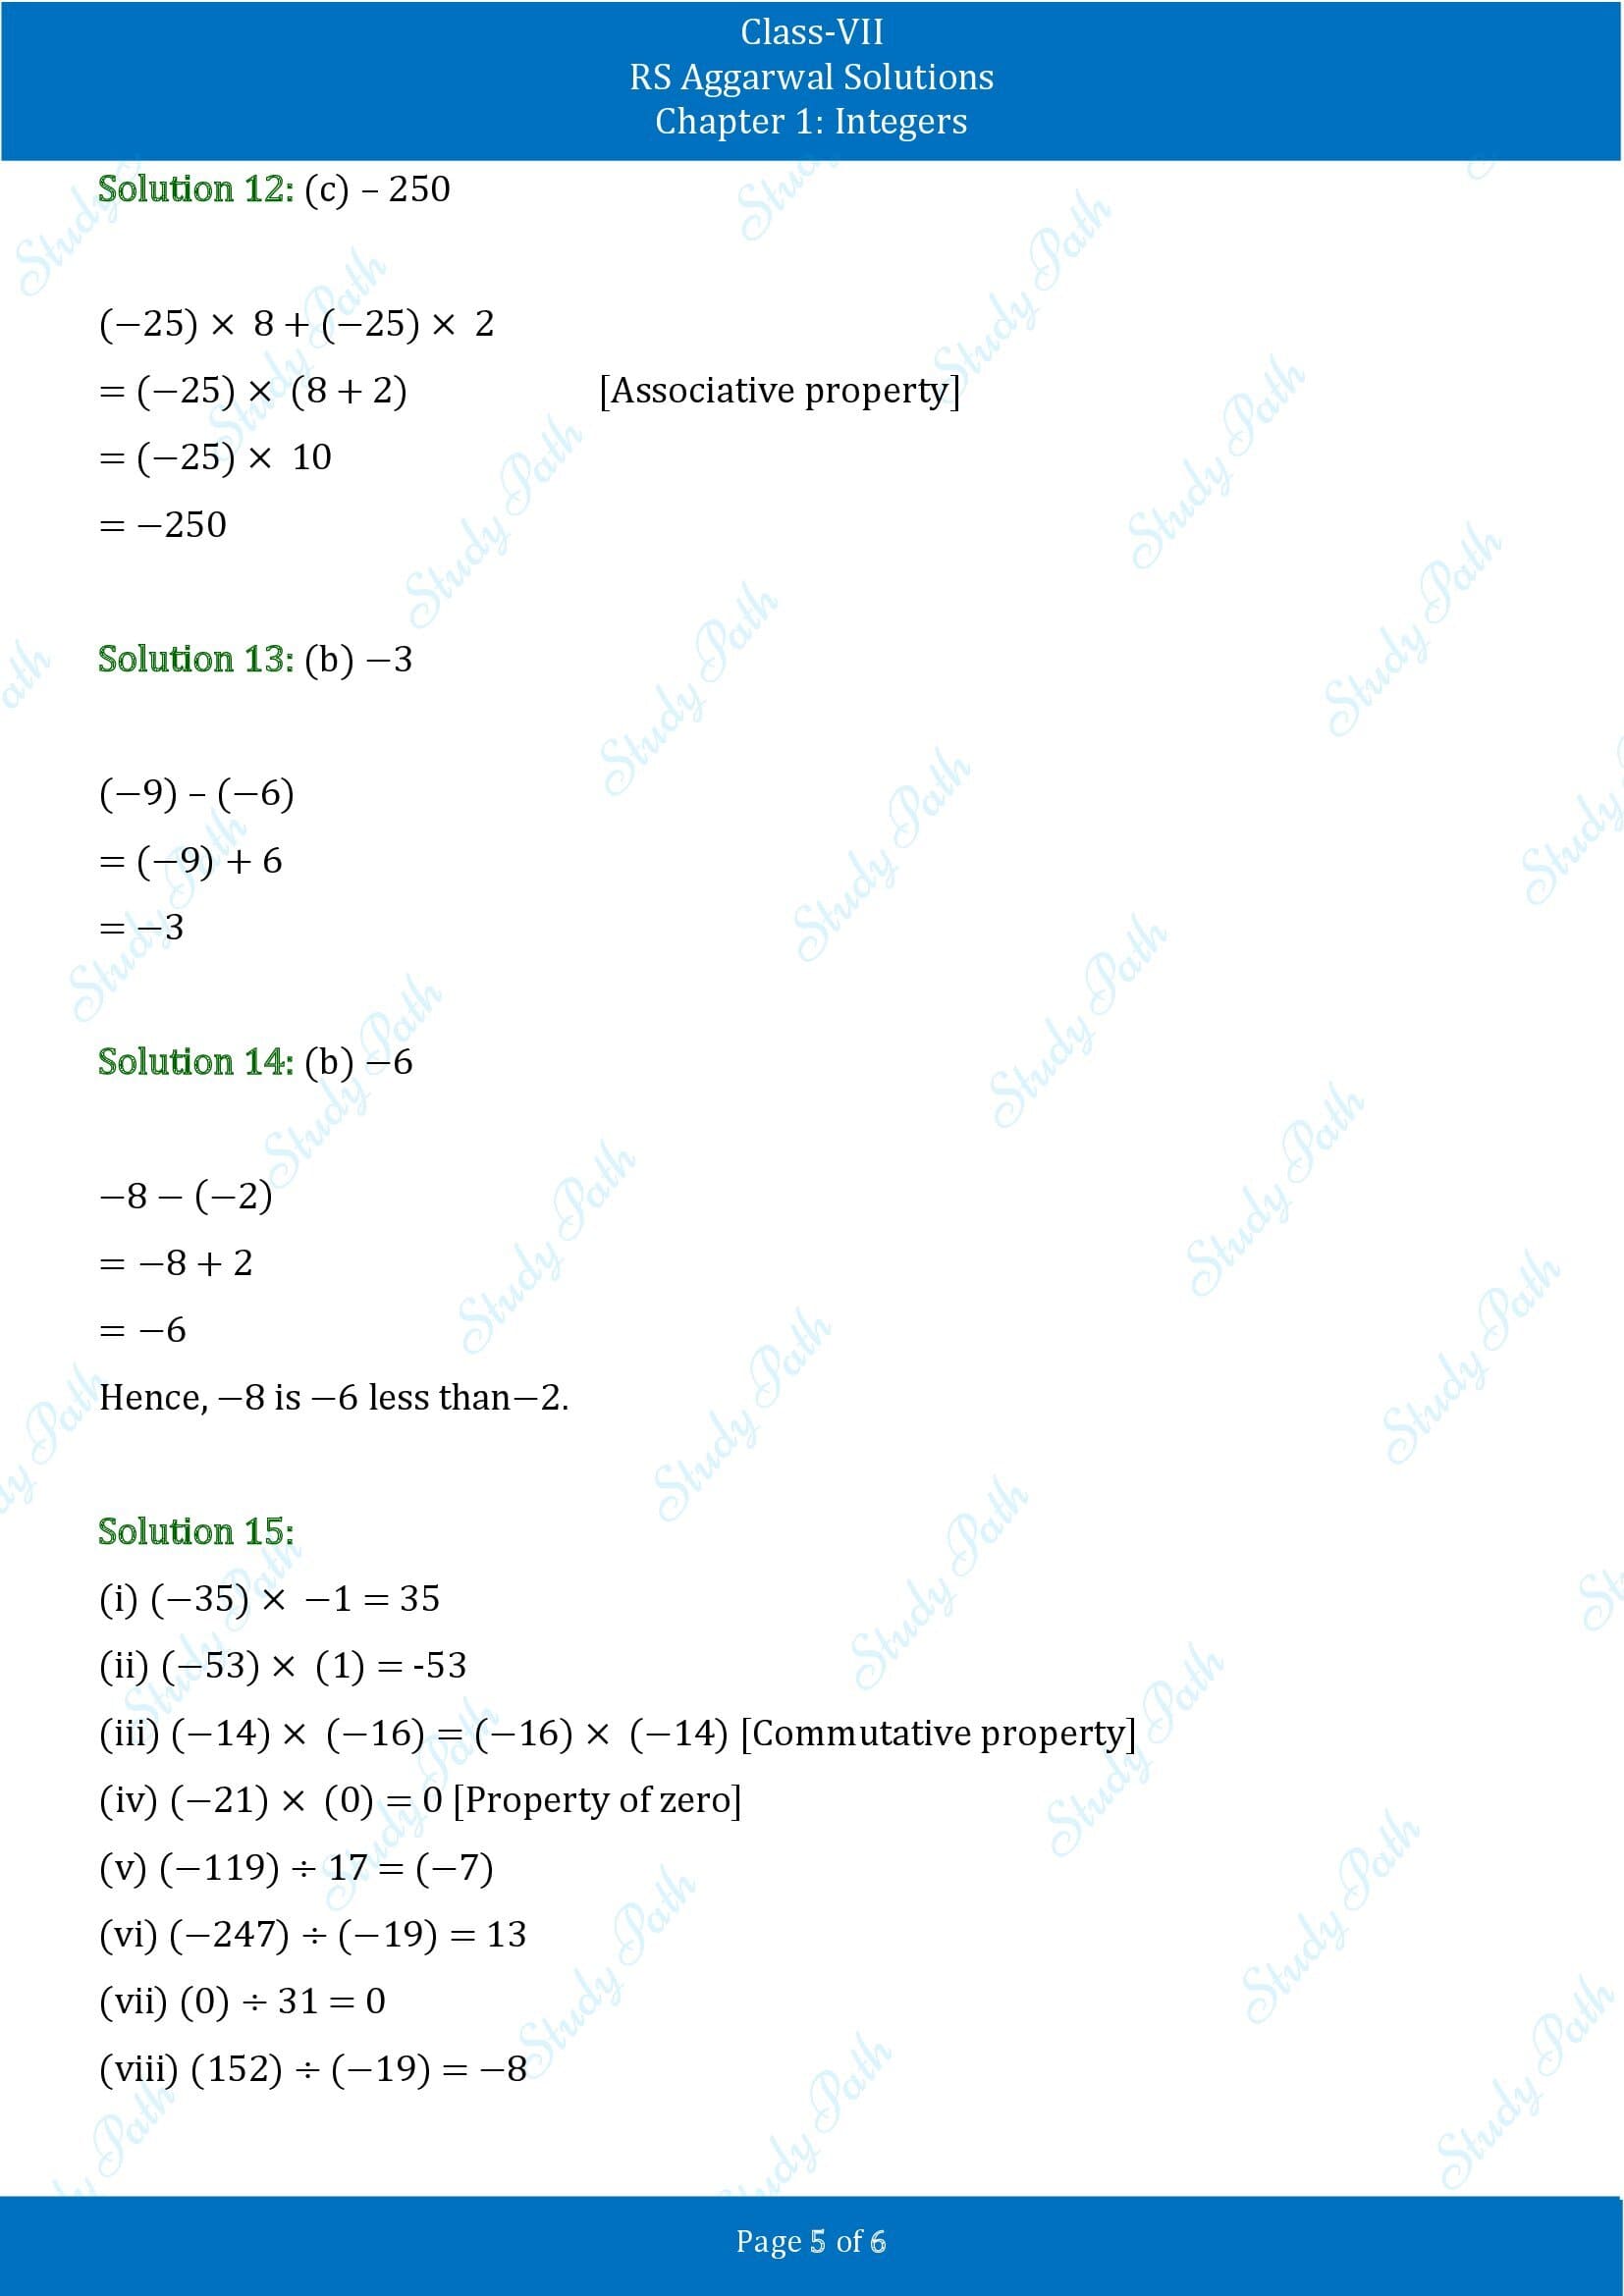 RS Aggarwal Solutions Class 7 Chapter 1 Integers Test Paper 00005